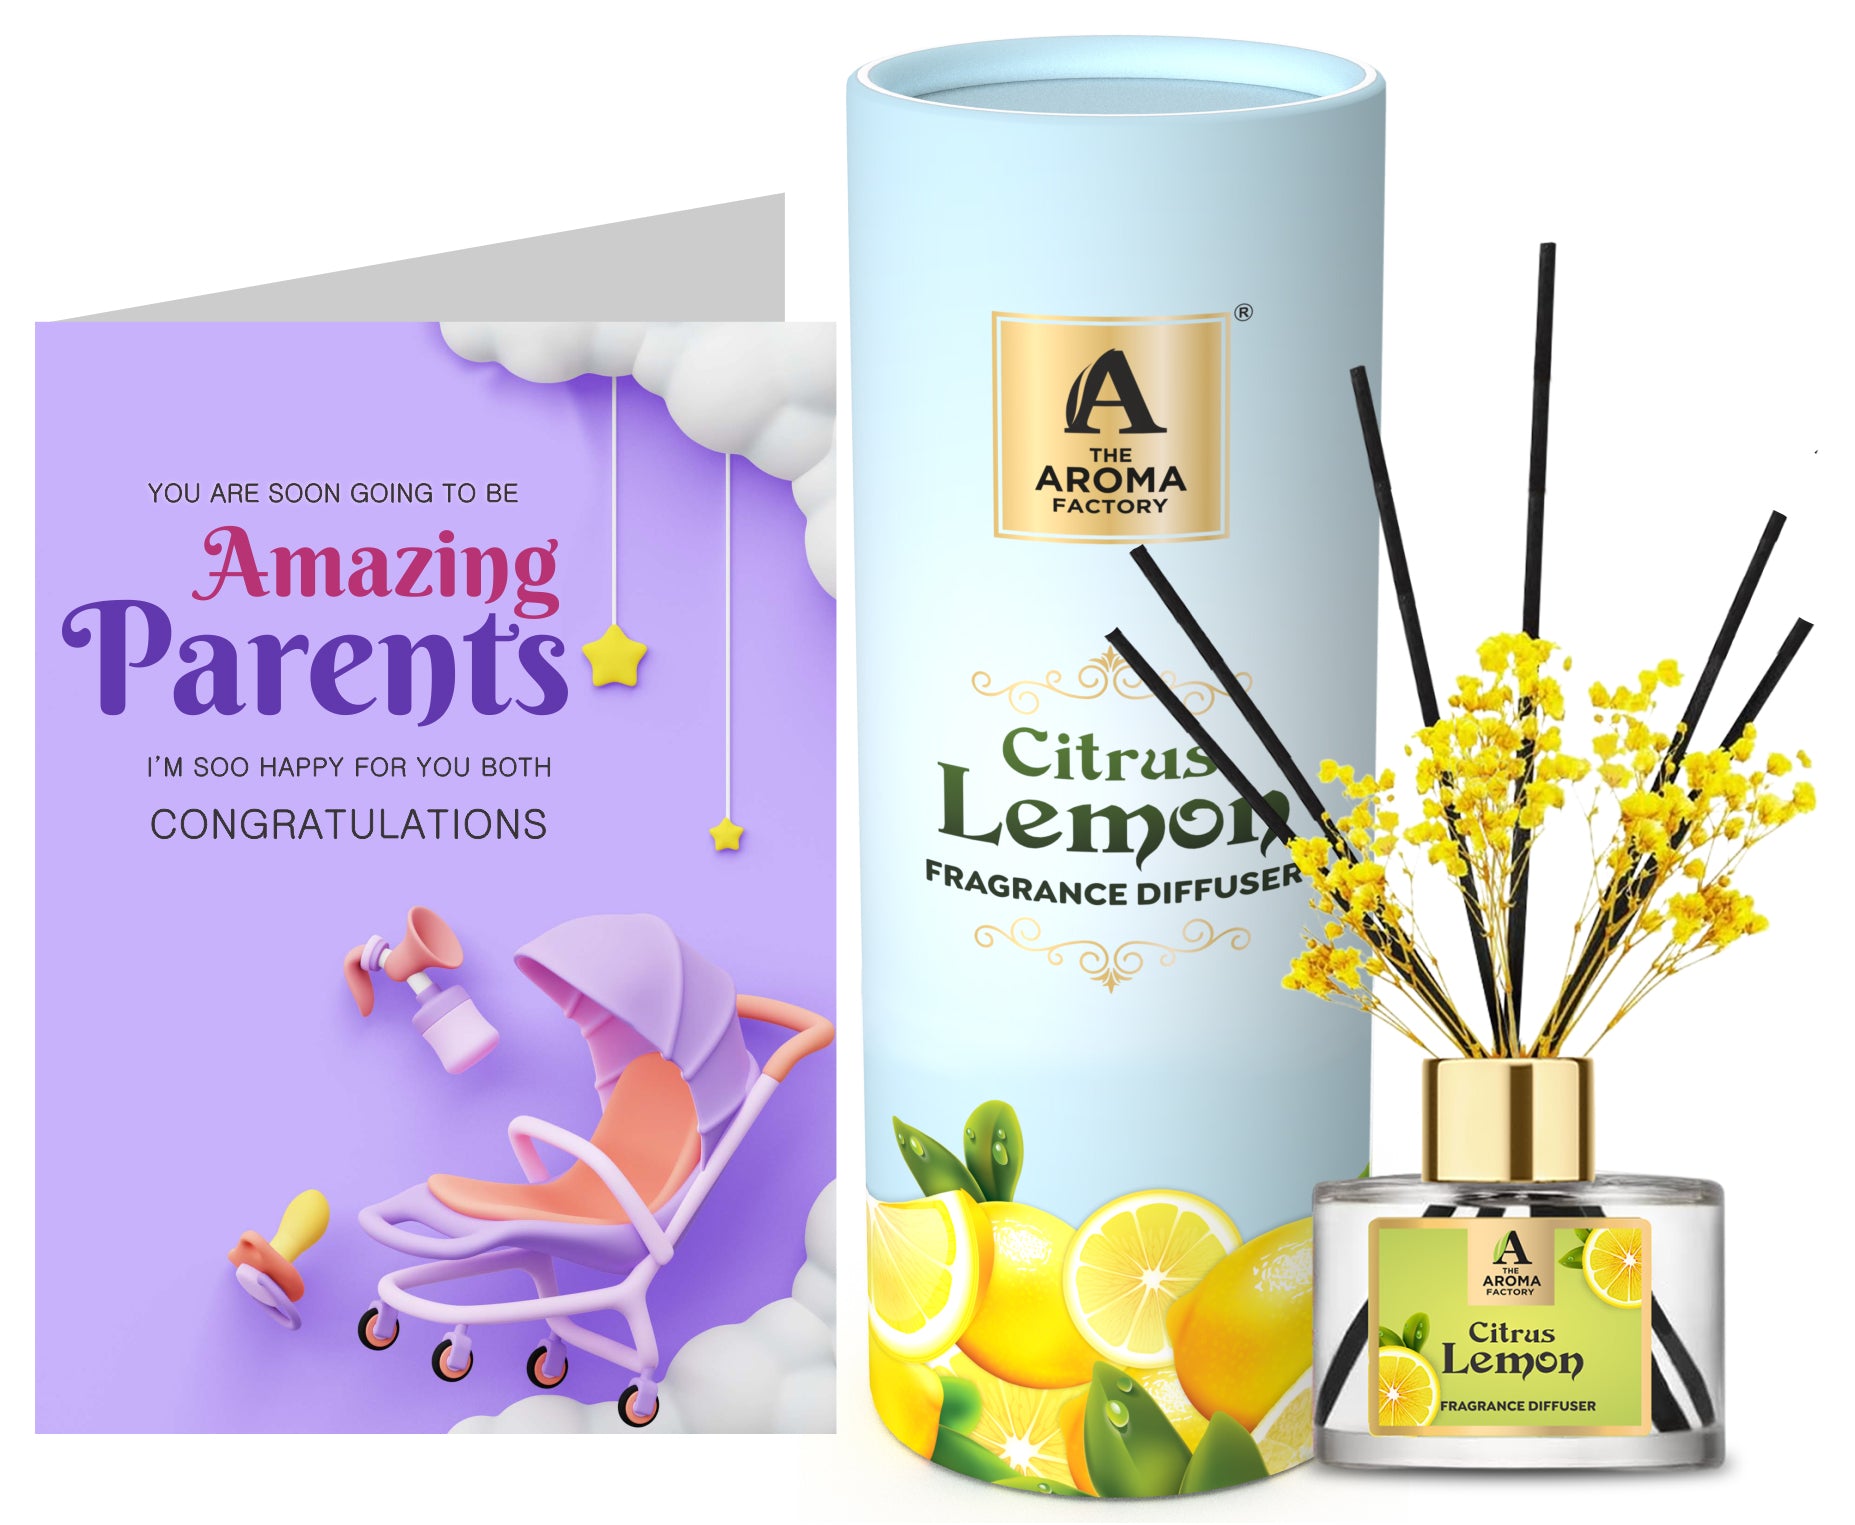 The Aroma Factory Baby Shower Gift Pregnant Expecting Couple/to be Parents with Card, Citrus Lemon Fragrance Reed Diffuser Set (1 Box + 1 Card)